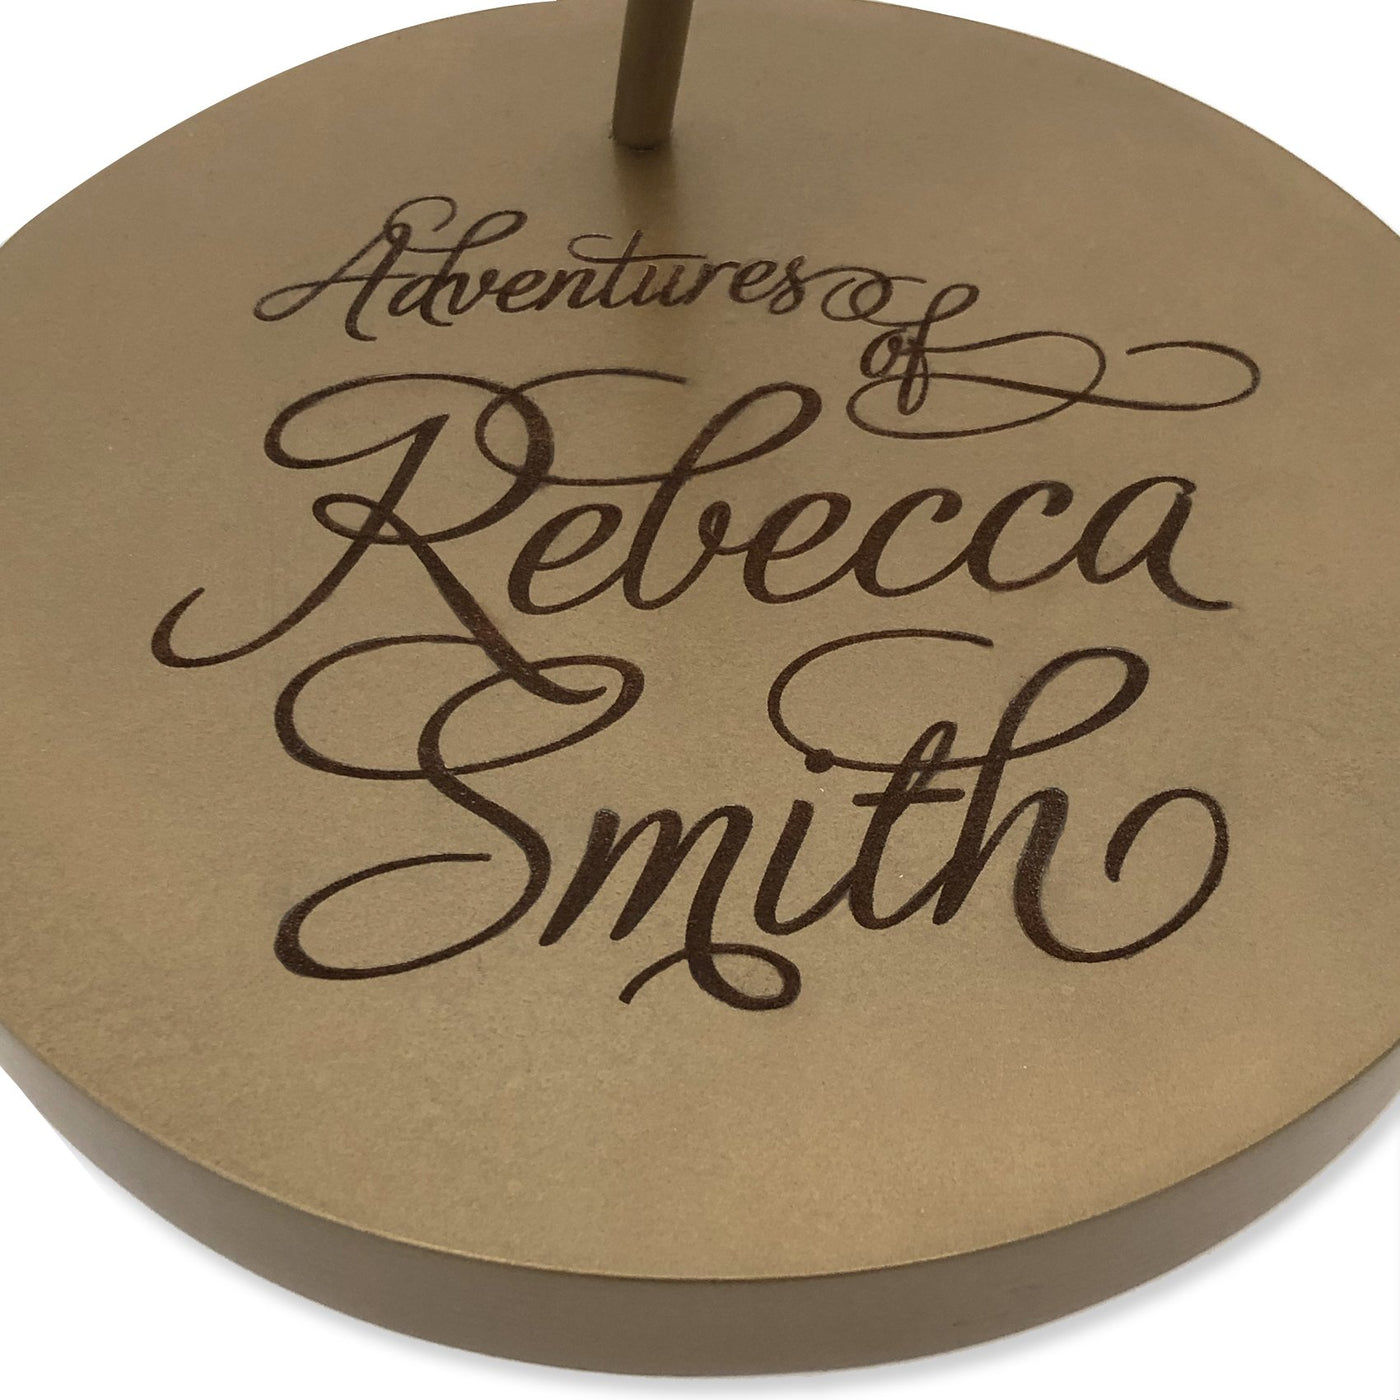 Personalized and Engraved Adventures Push Pin Globe by Wendy Gold